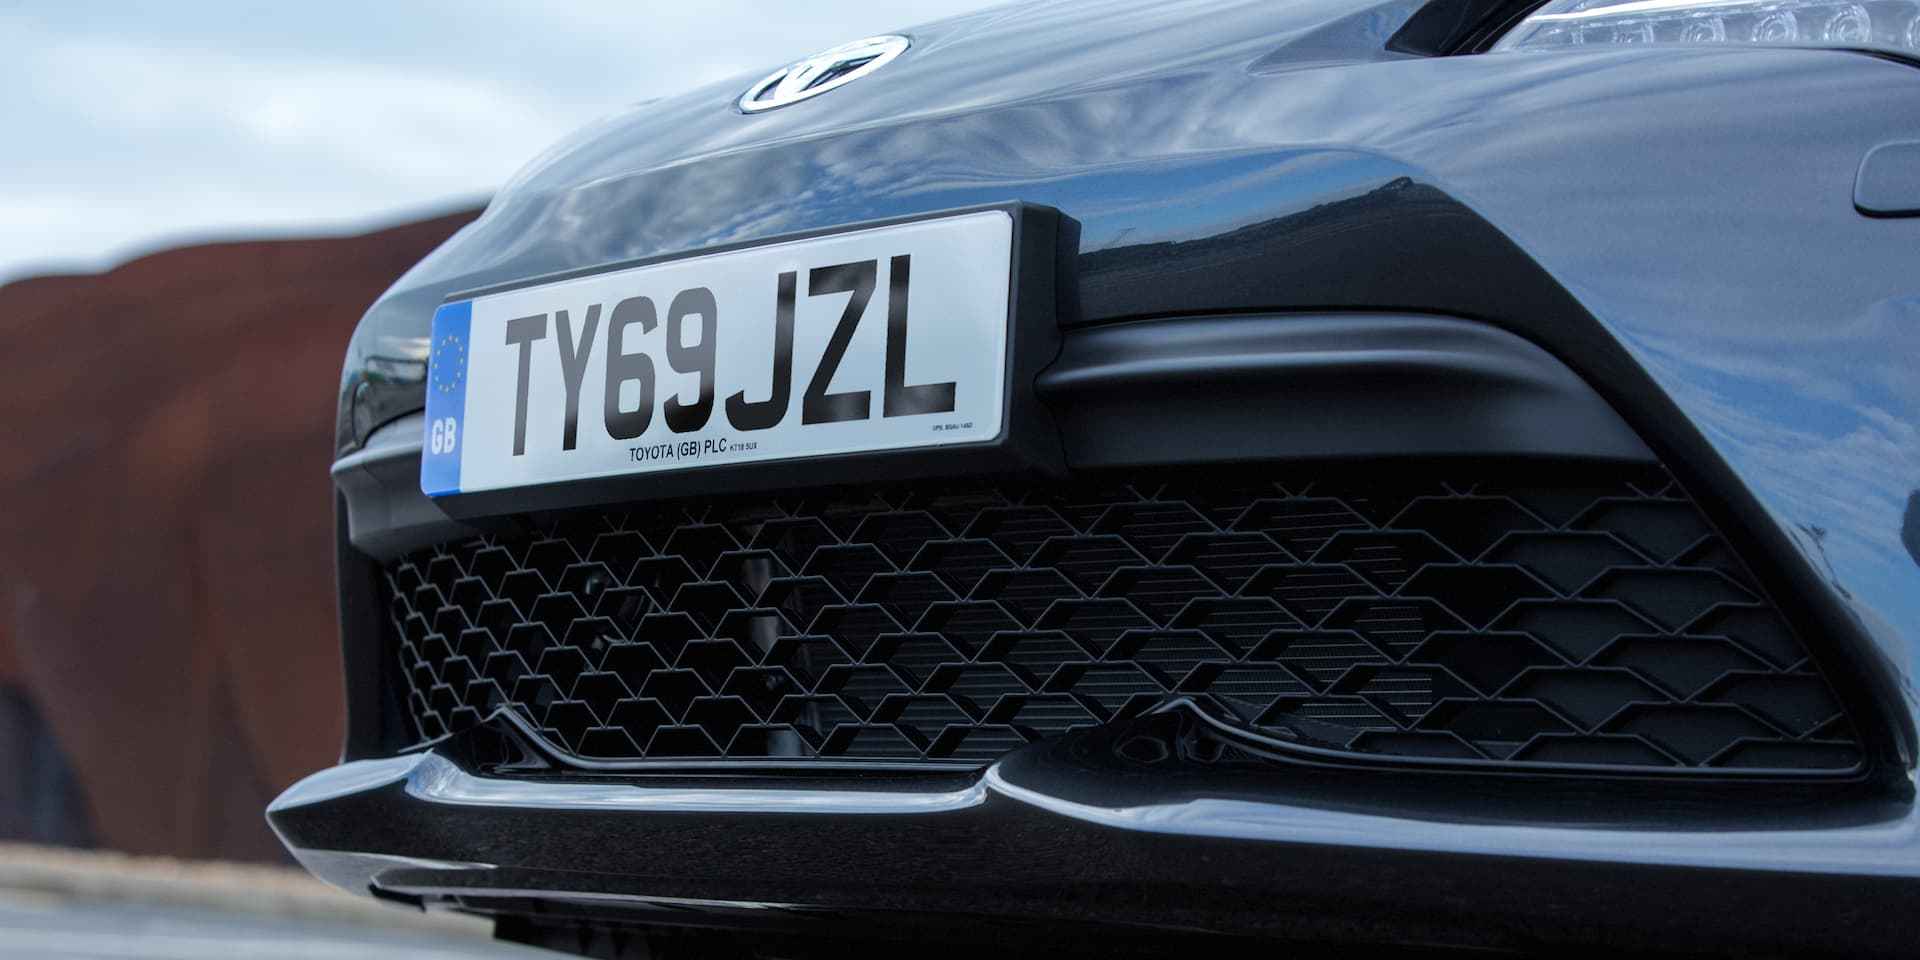 A black car with a personalized number plate